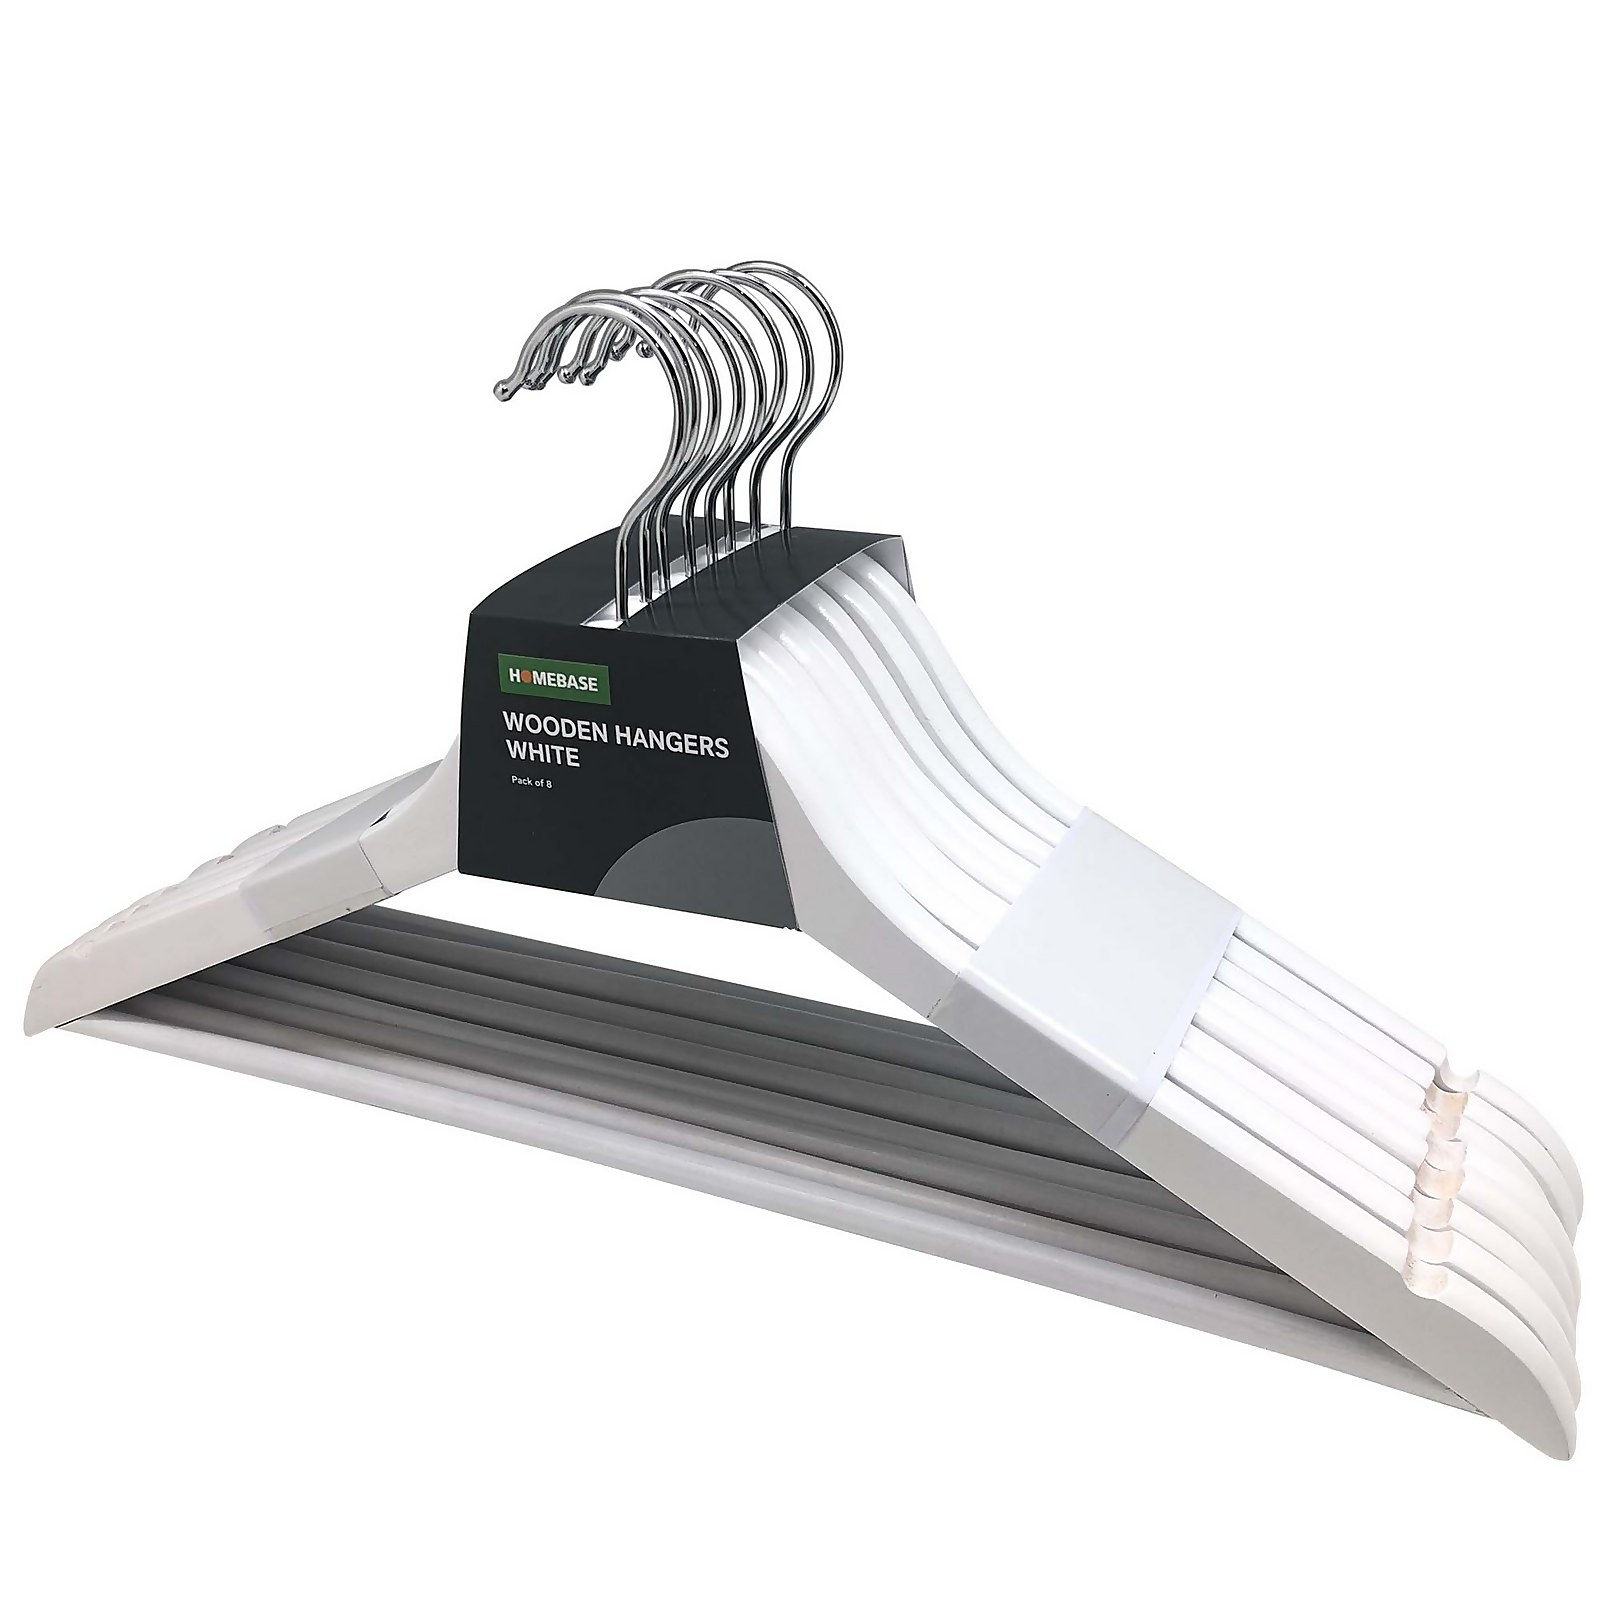 Photo of White Wooden Hangers - 8 Pack